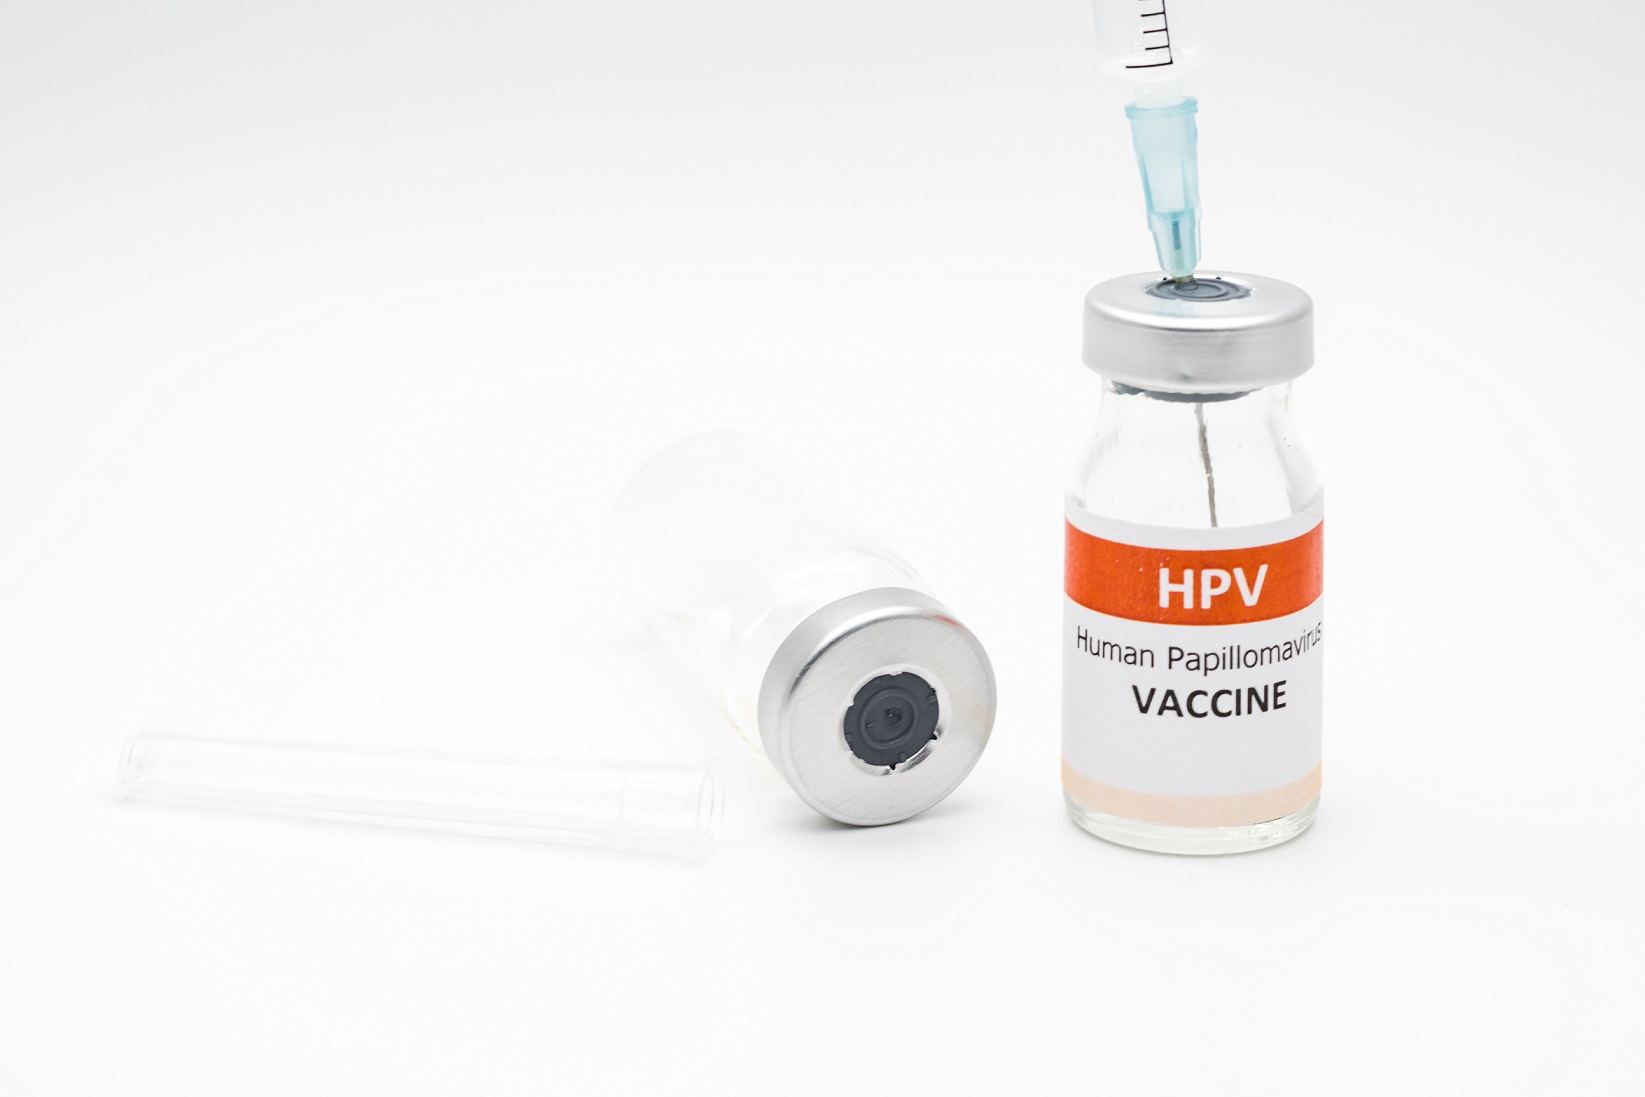 Nordic Cochrane Center Files Complaint About Scientific Misconduct, Secrecy in HPV Vaccine Probe in Europe